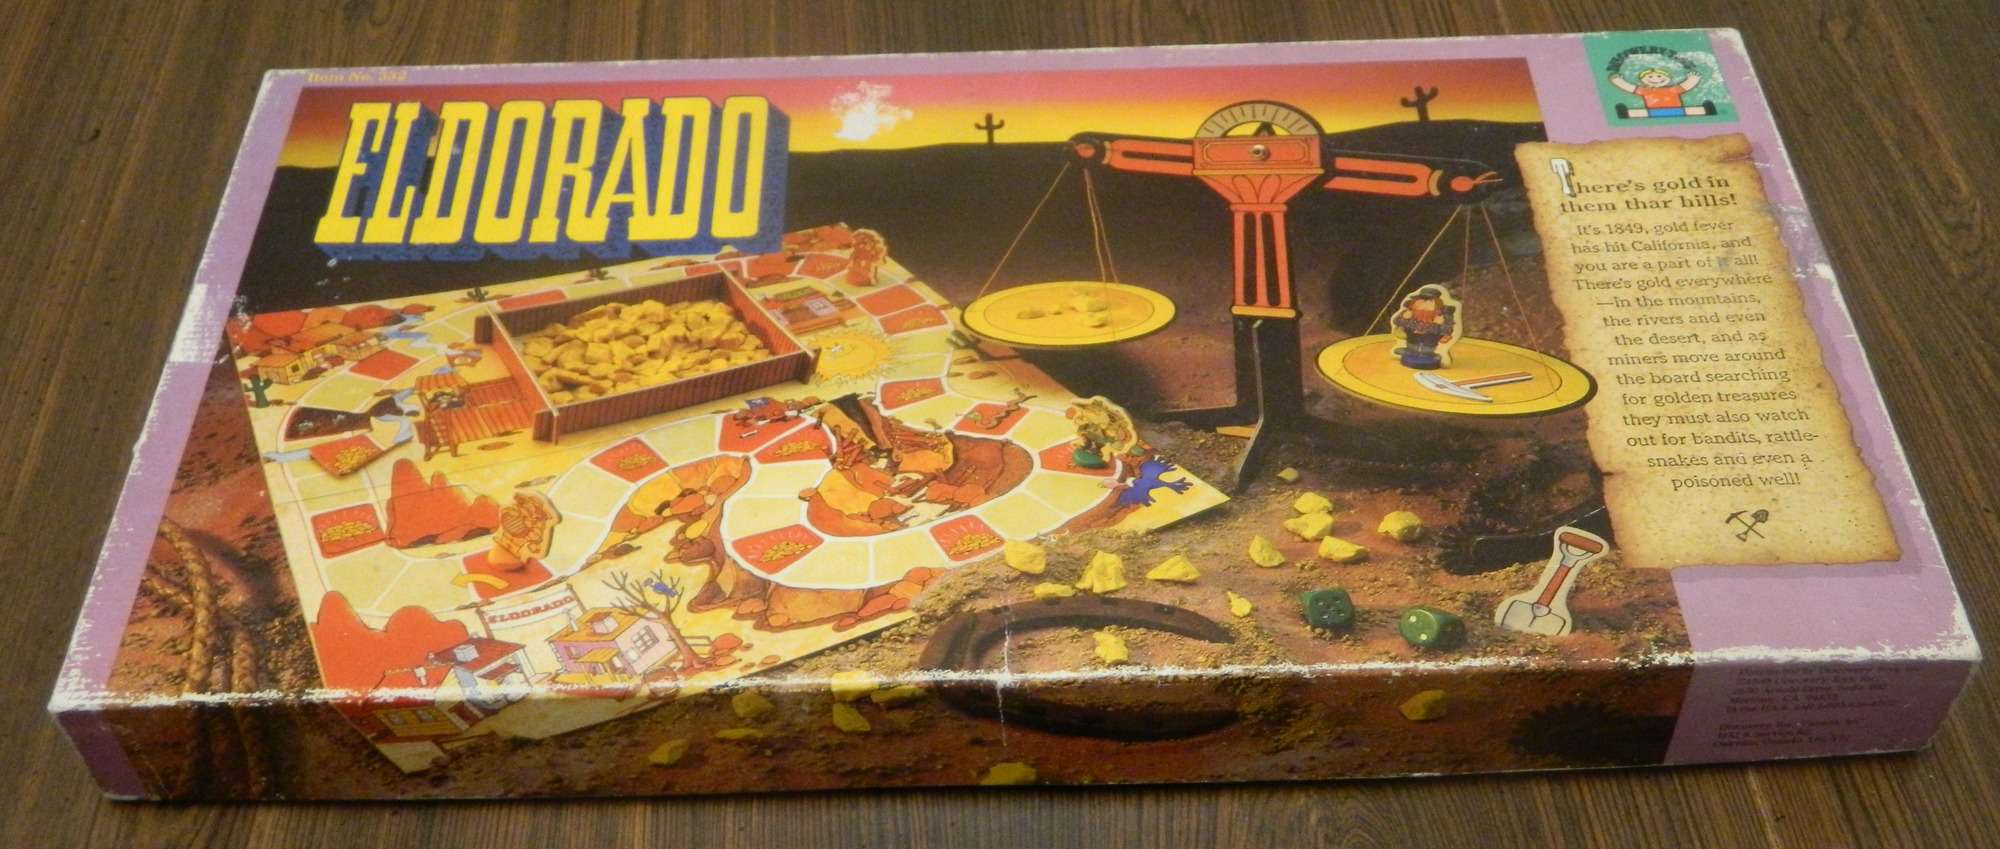 Eldorado Board Game Review and Instructions